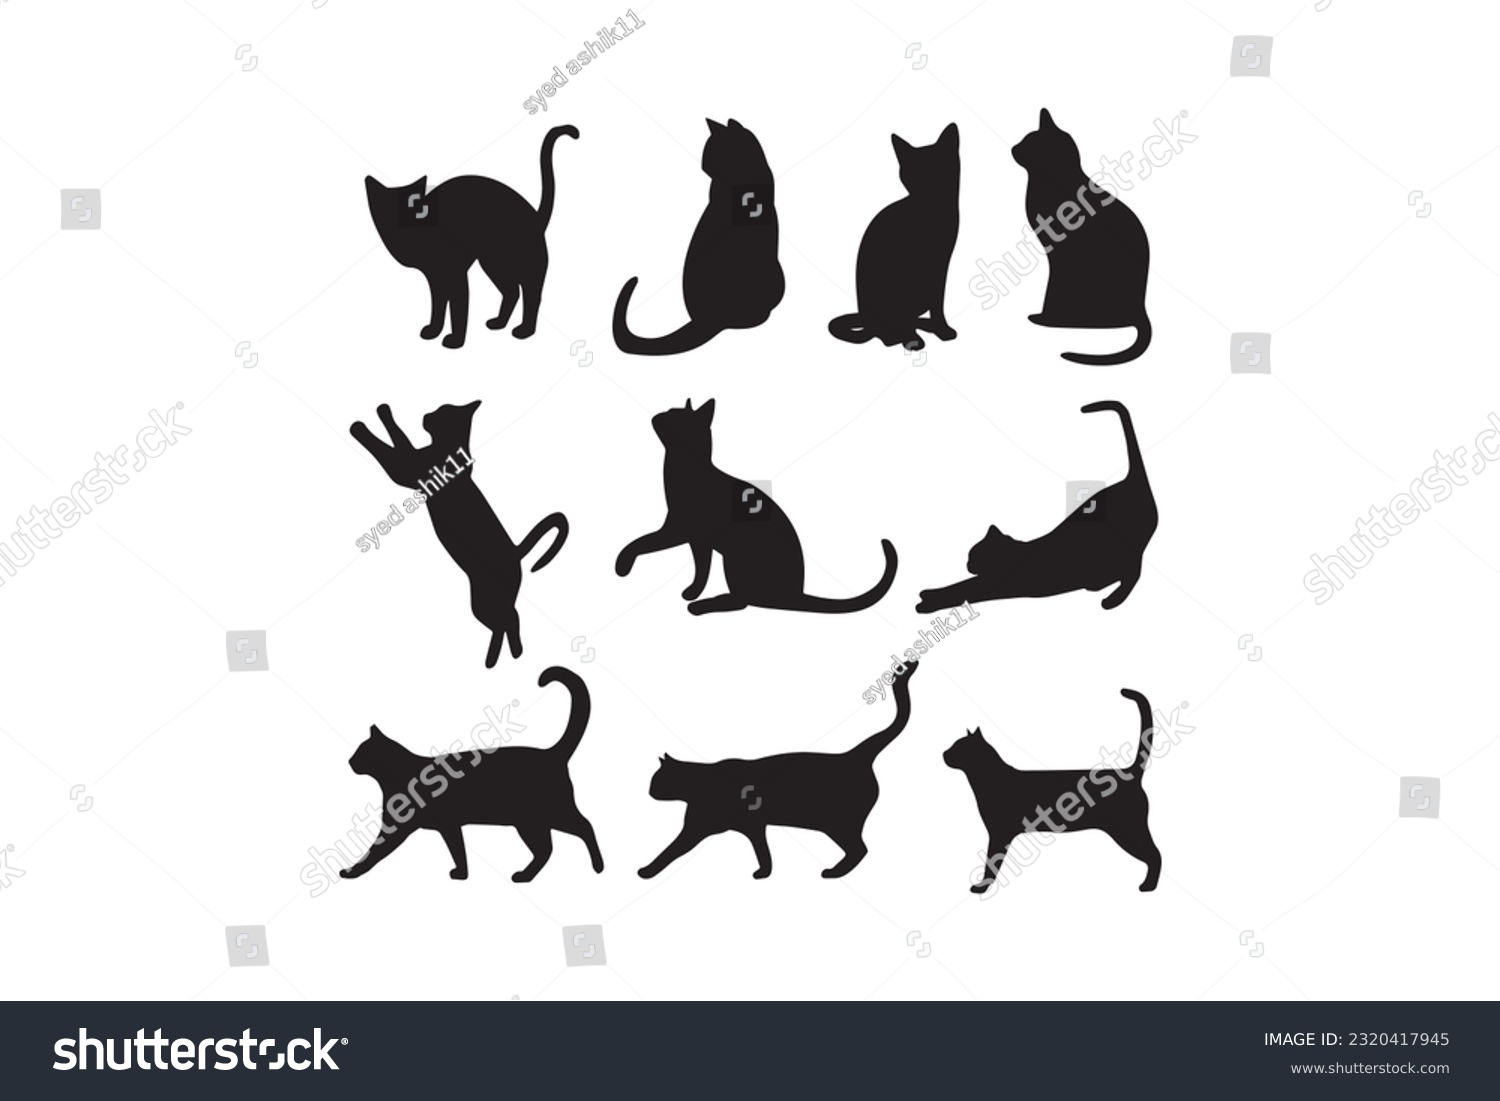 SVG of vector silhouette of cats in different positions, vector hand drawn animals silhouette set, vector vector cats set. animal pet, wildcat and kitten, hunter and predator, black silhouette illustration. svg